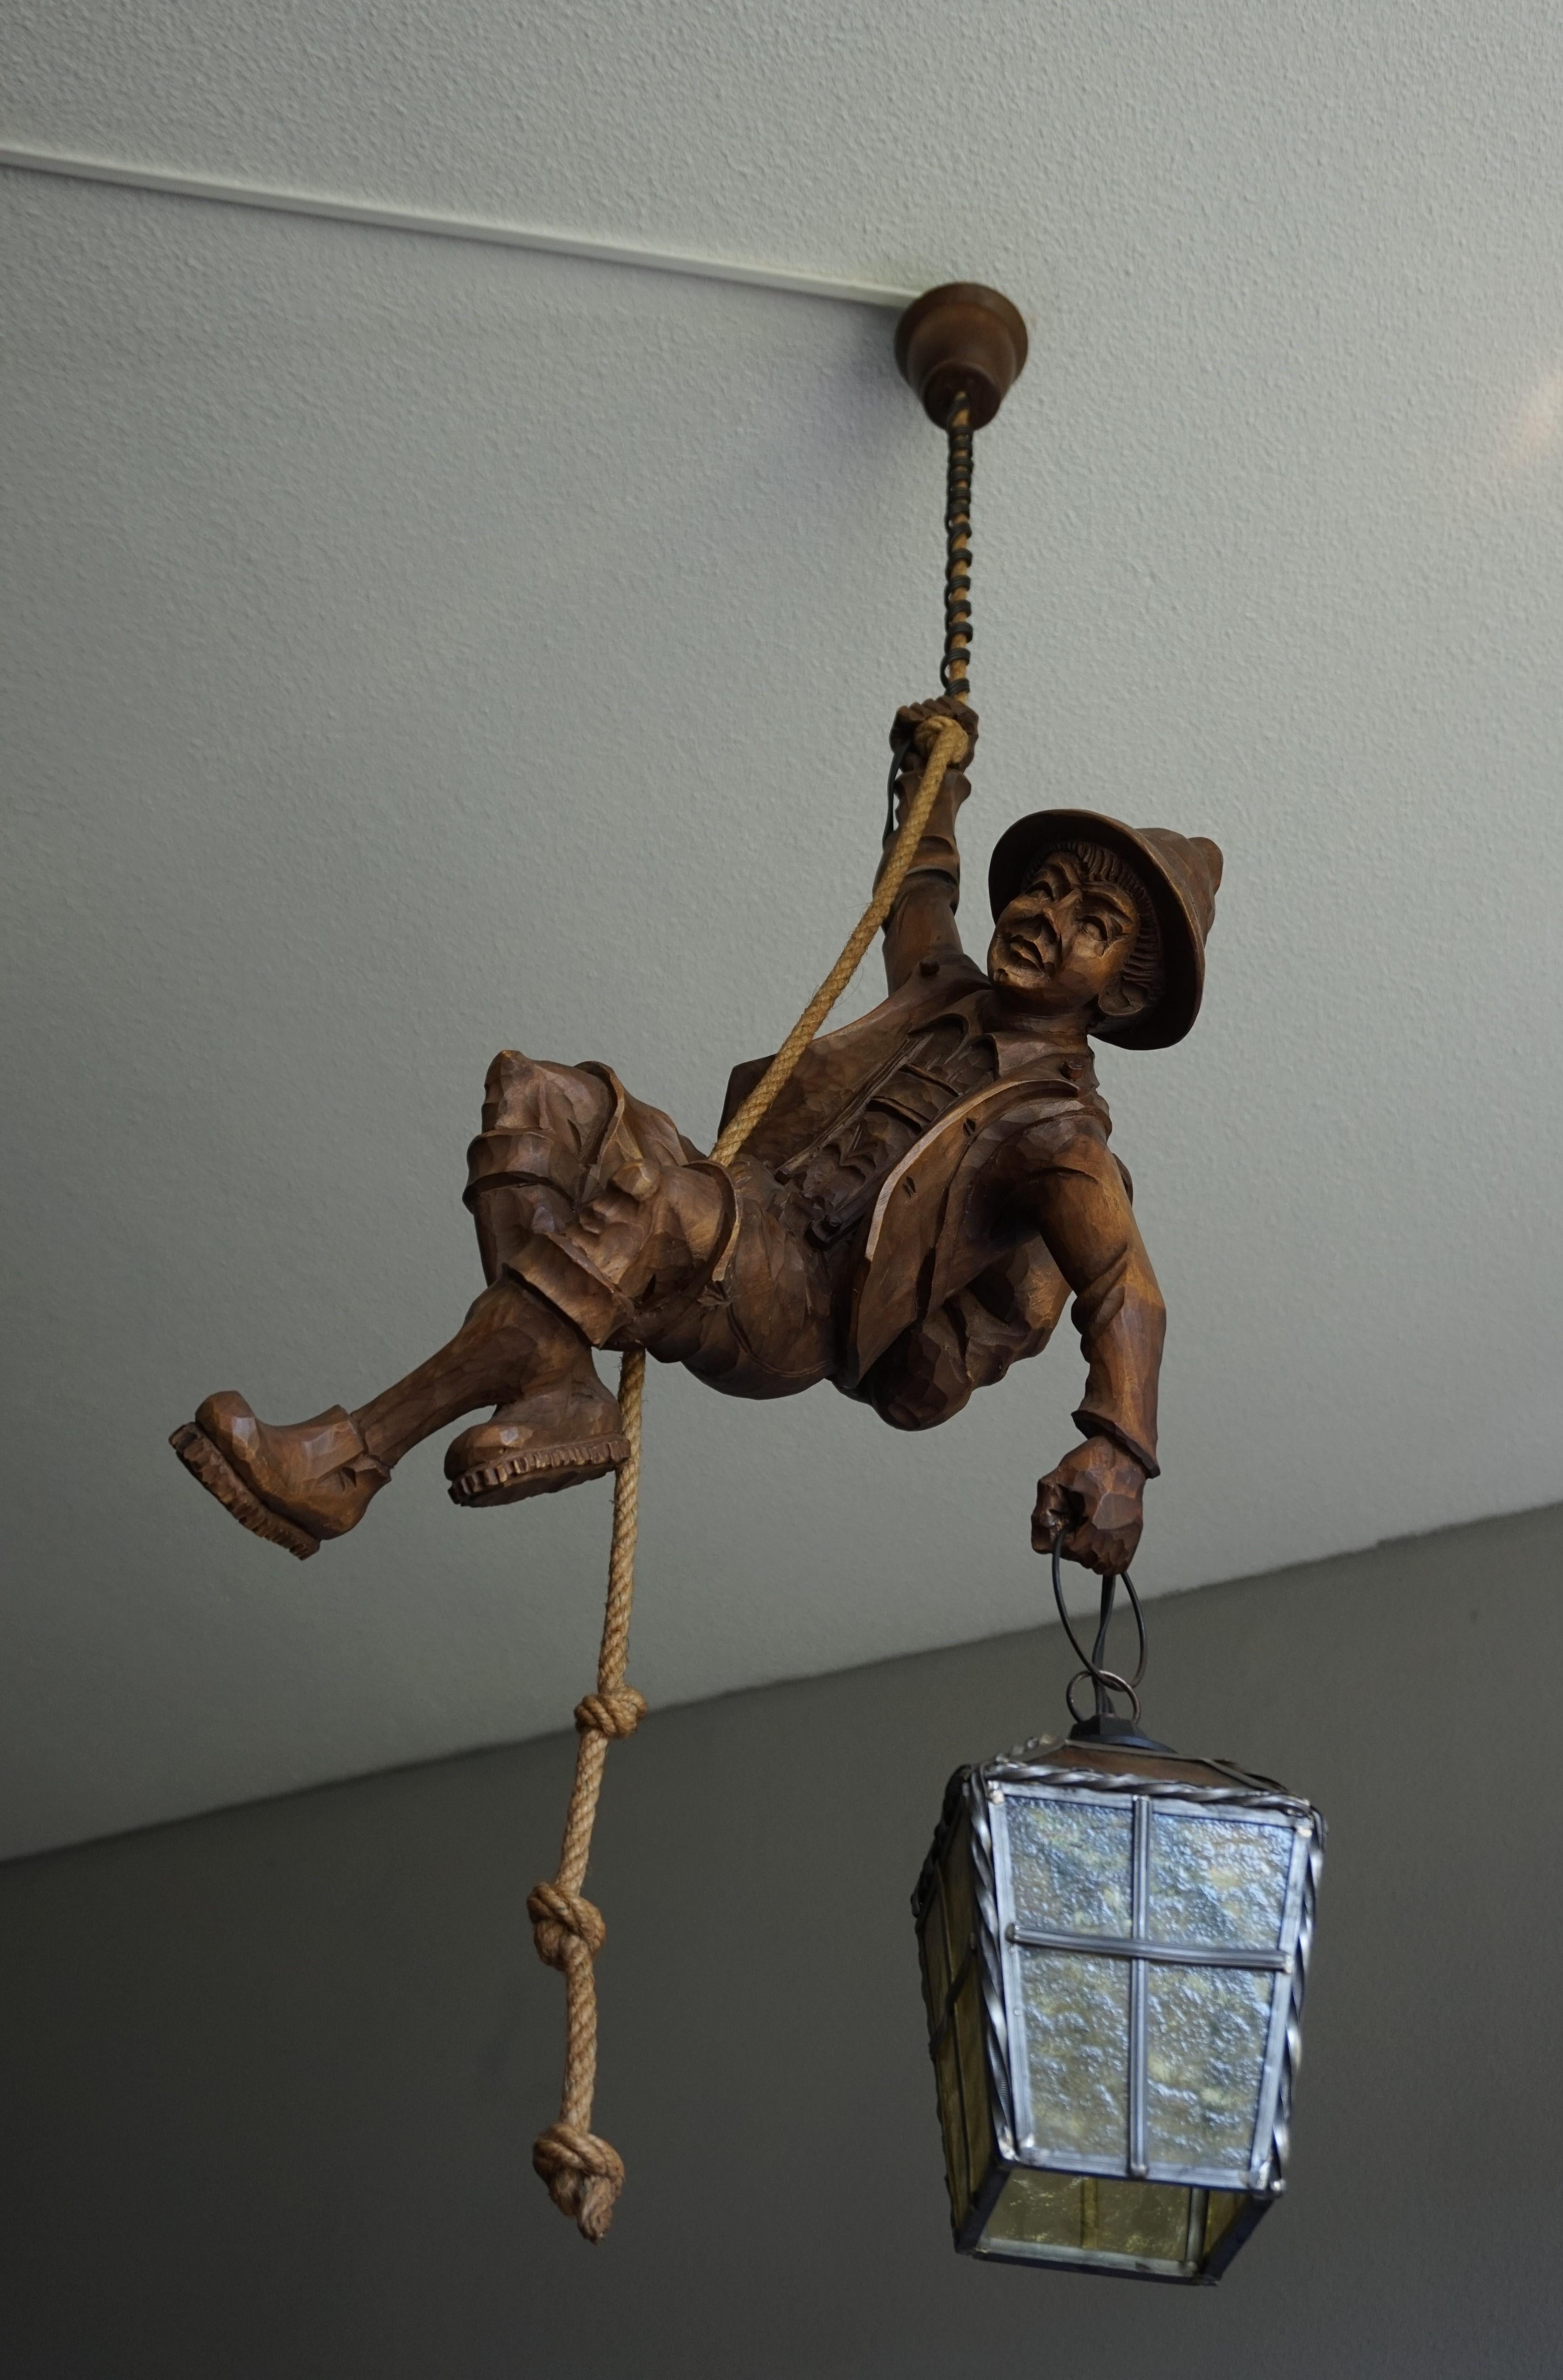 Rare and beautifully crafted light fixture for Black Forest and mountaineering enthousiasts.

This beautifully executed and sculptural light fixture will look great at home, but it can also create the perfect atmosphere in a lodge, a mancave, a